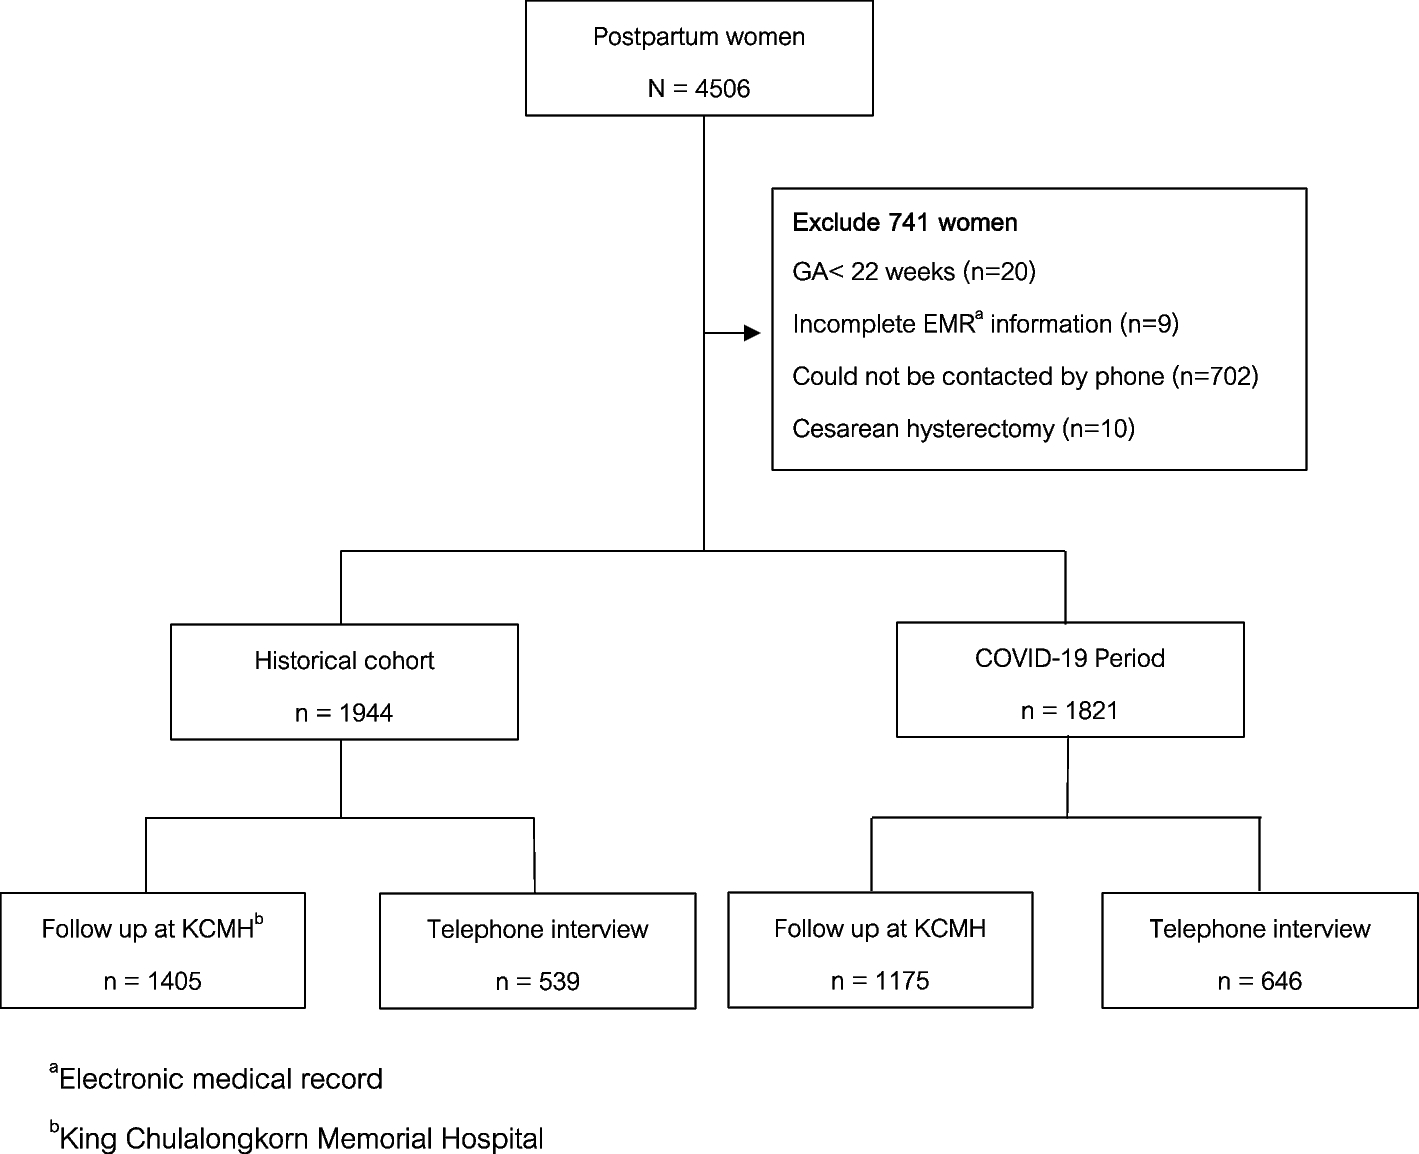 The prevalence of contraceptive use among postpartum women and its associated factors during the early phase of COVID-19 outbreak: a time series study